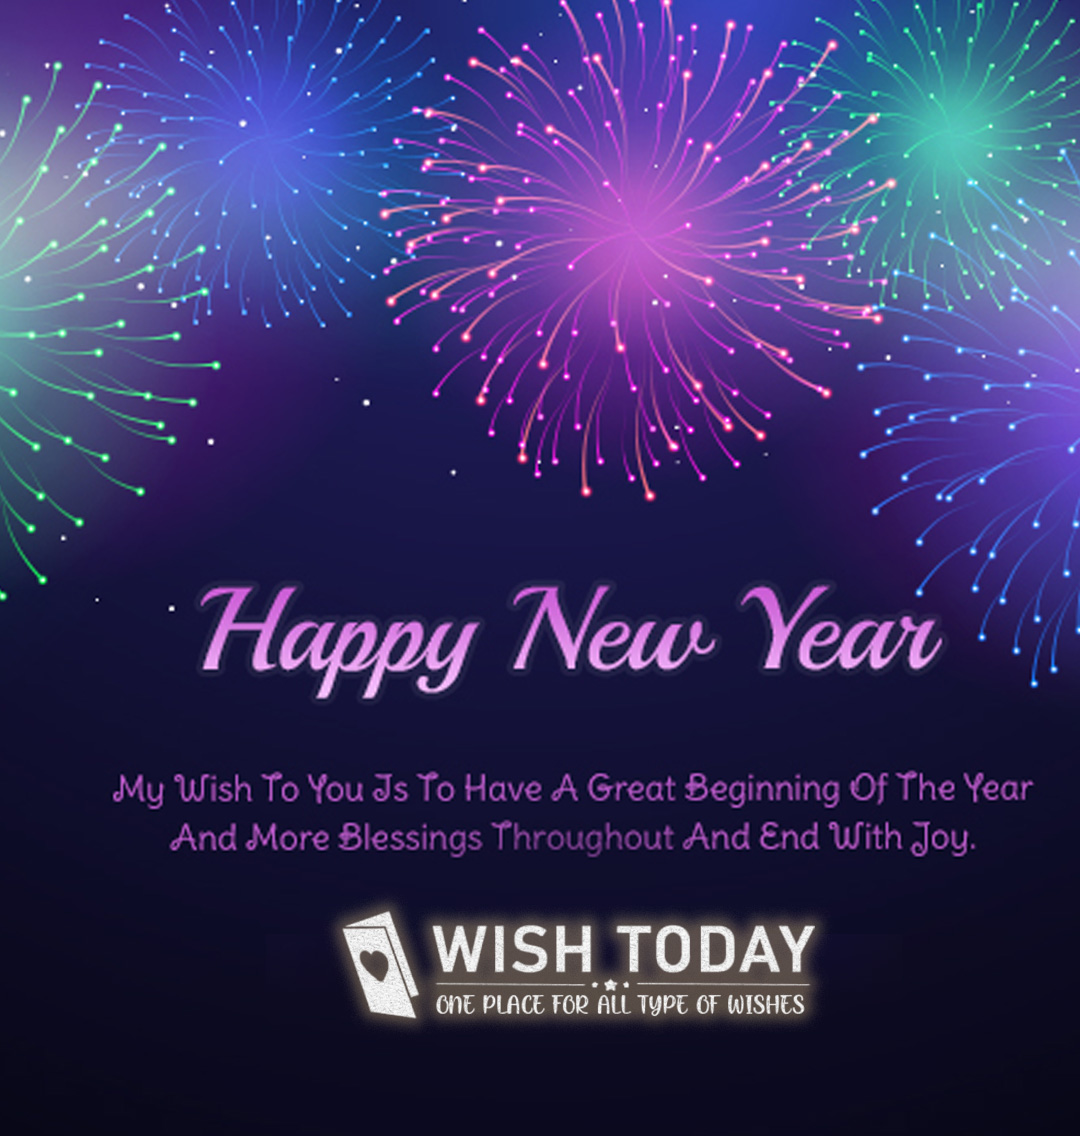  new year wishes new year wishes, greetings hindu new year wishes new year wishes for friends new year wishes sms short new year wishes new year wishes 2020 happy new year images 2021